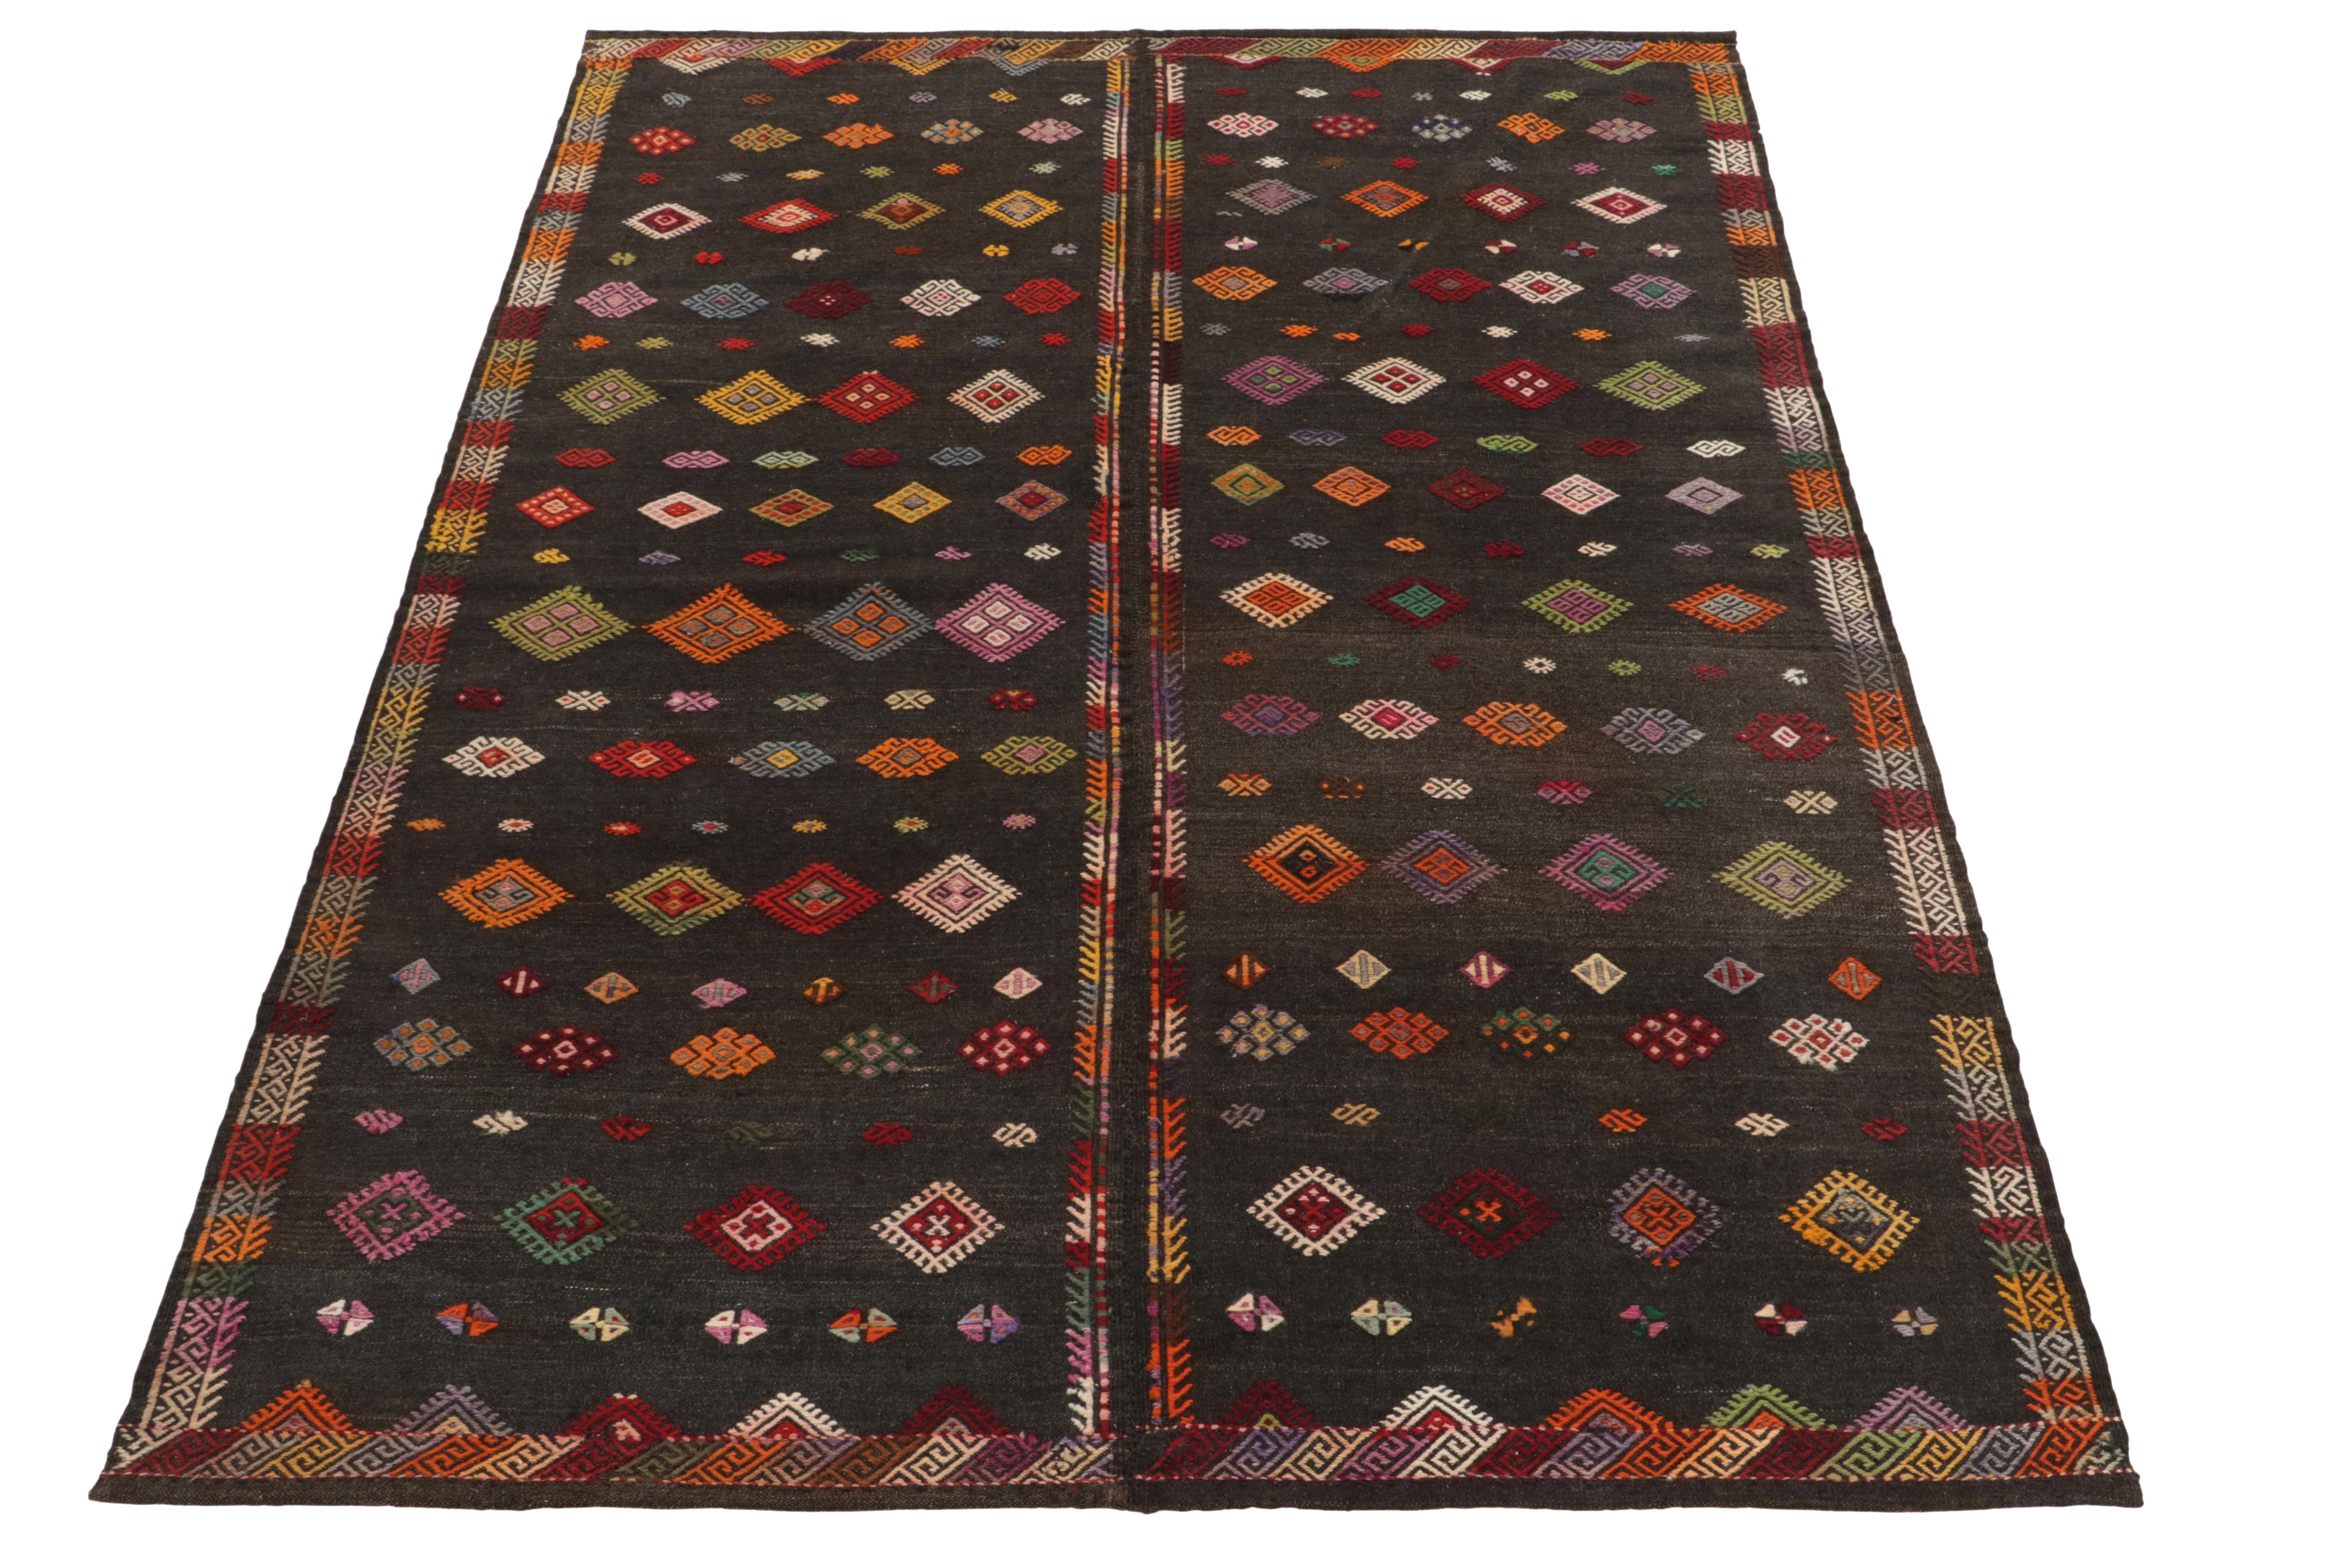 Handwoven in wool, a 7x9 vintage kilim rug from Turkey connoting distinguished mid-century aesthetics. The earth tonal gray-black background naturally uplifts brilliant embroidered patterns in variegated tones for an alluring visual appeal.